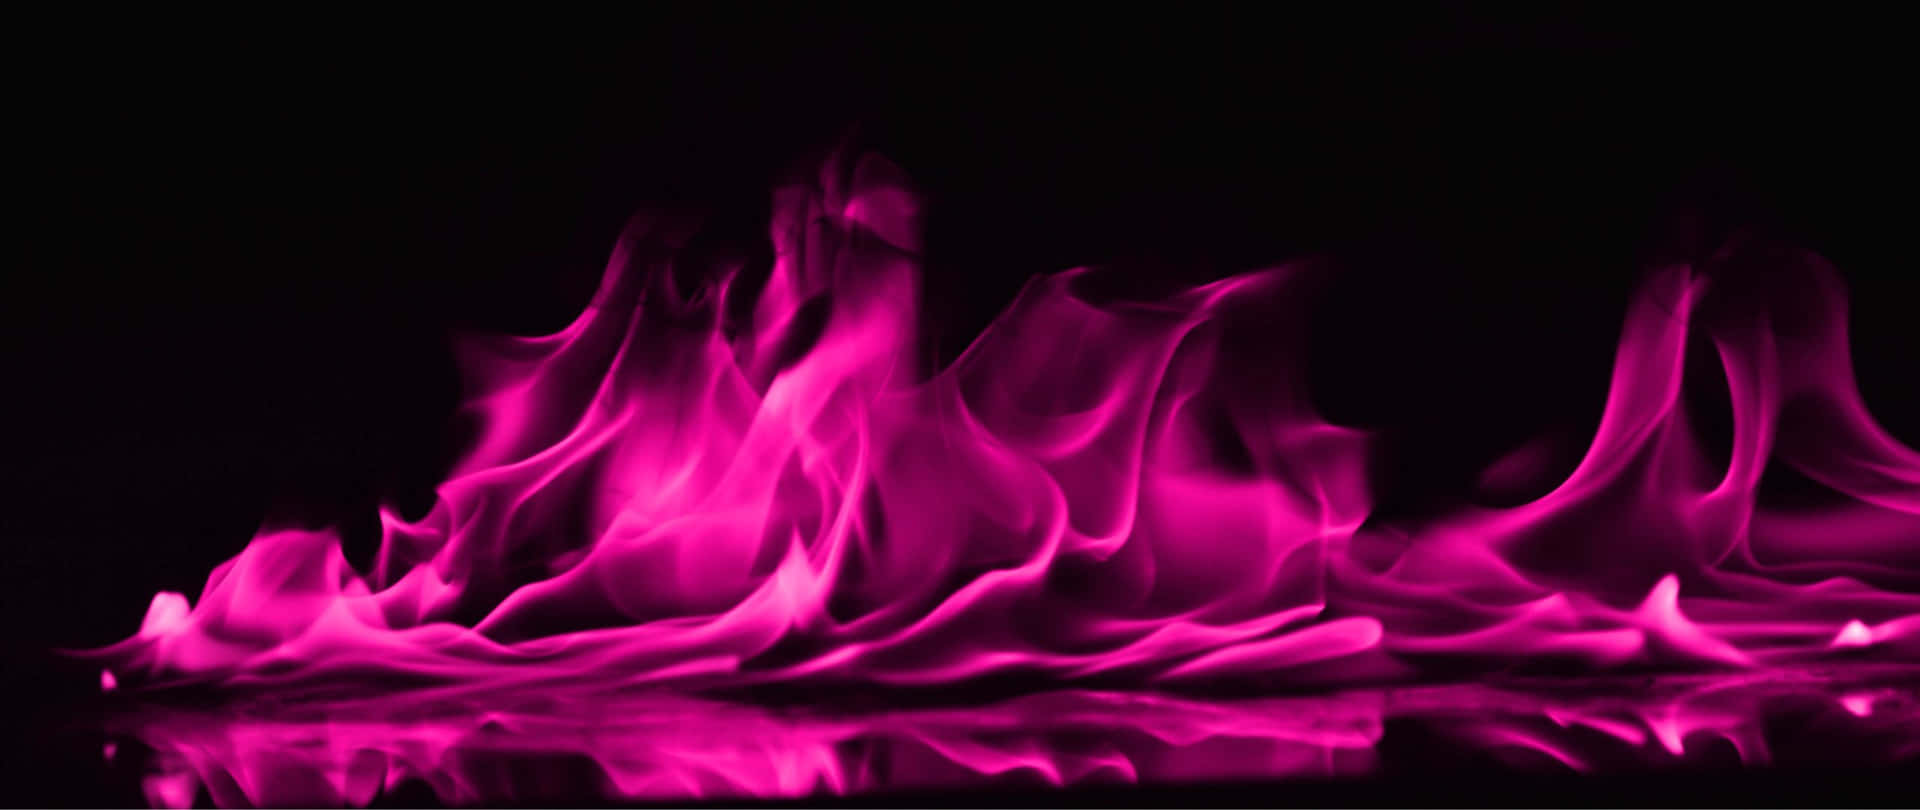 A Black Background With Pink Flames